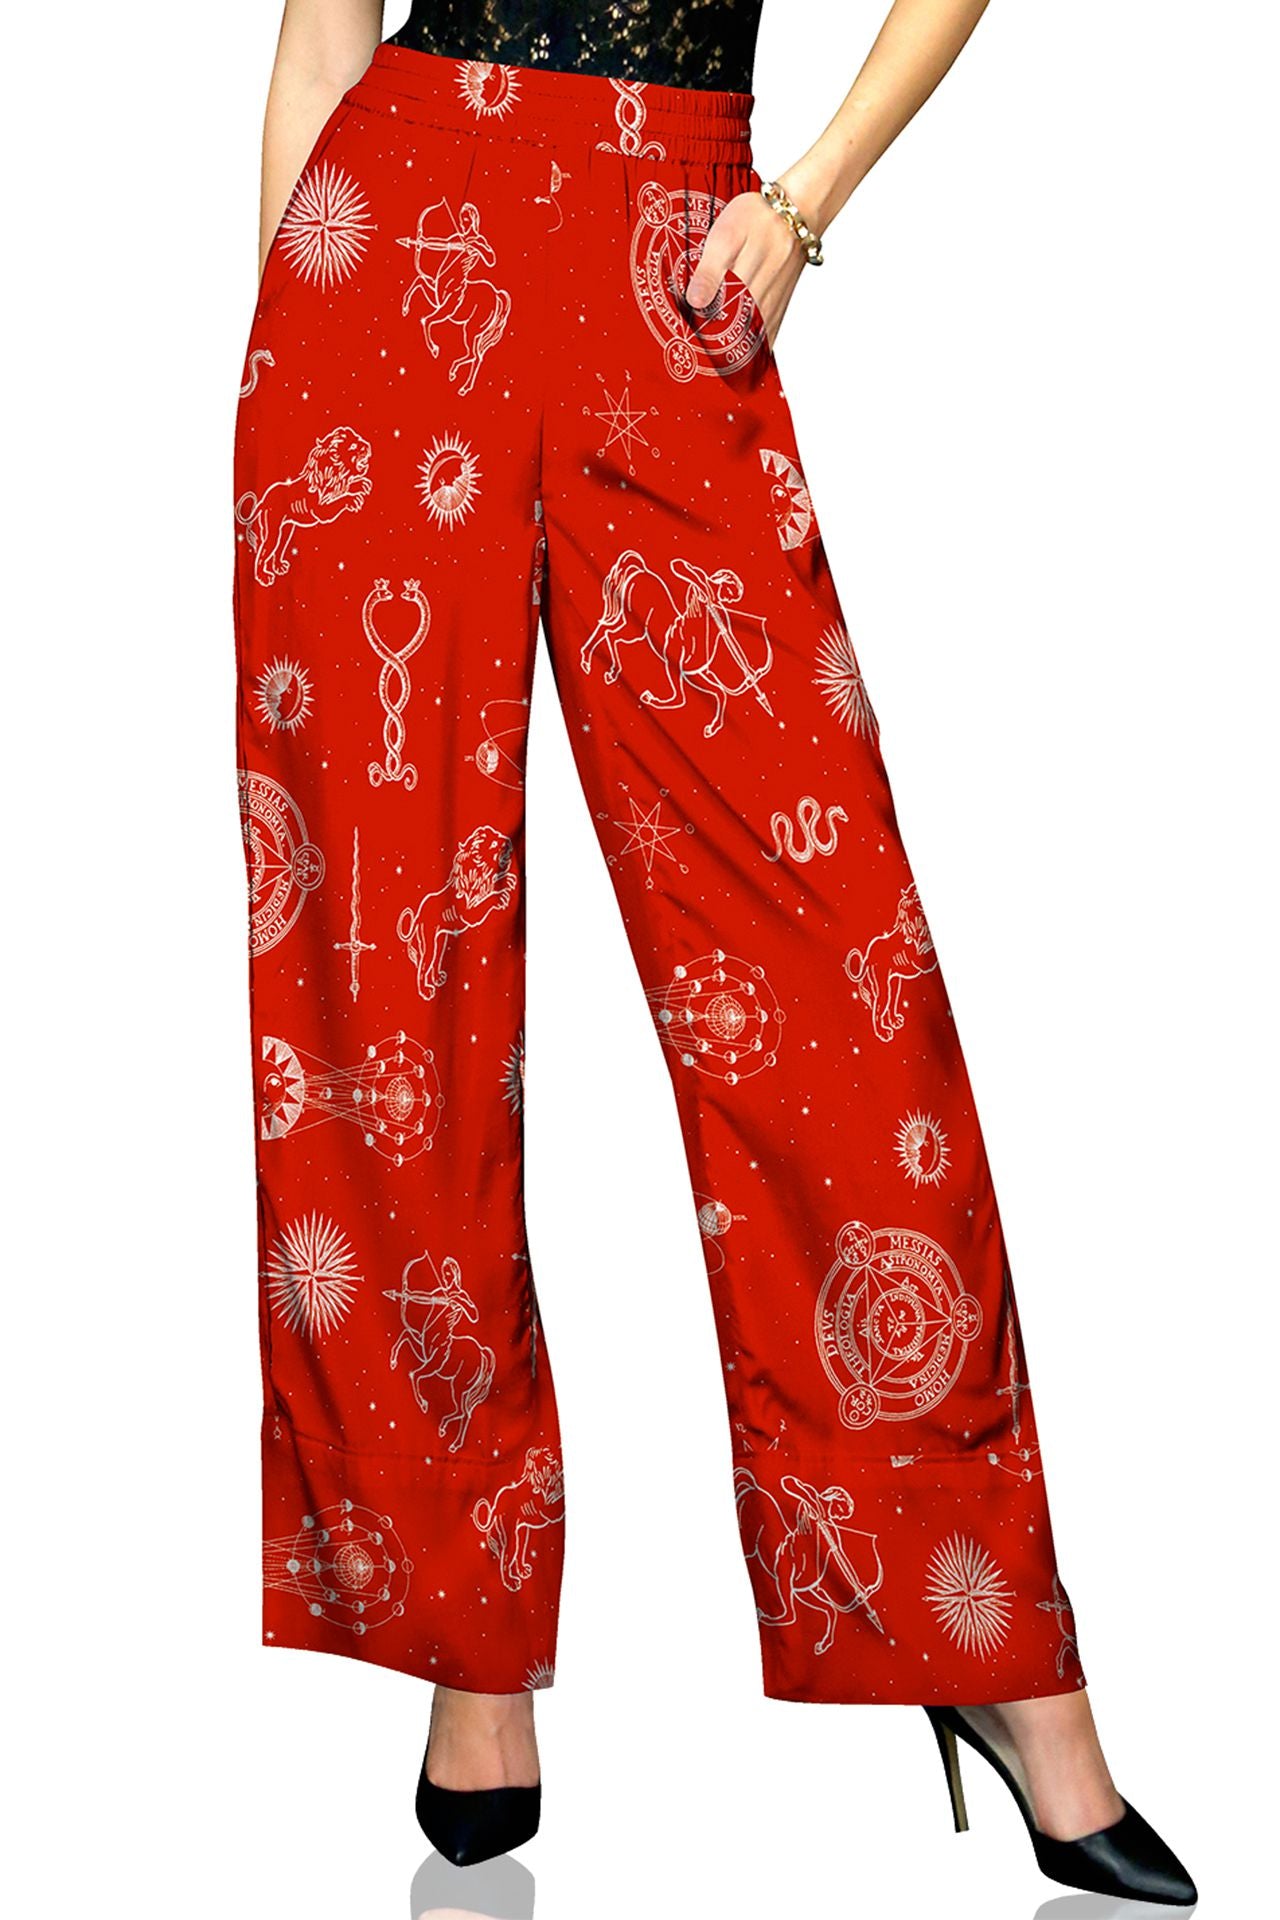 Red Cargo Pant